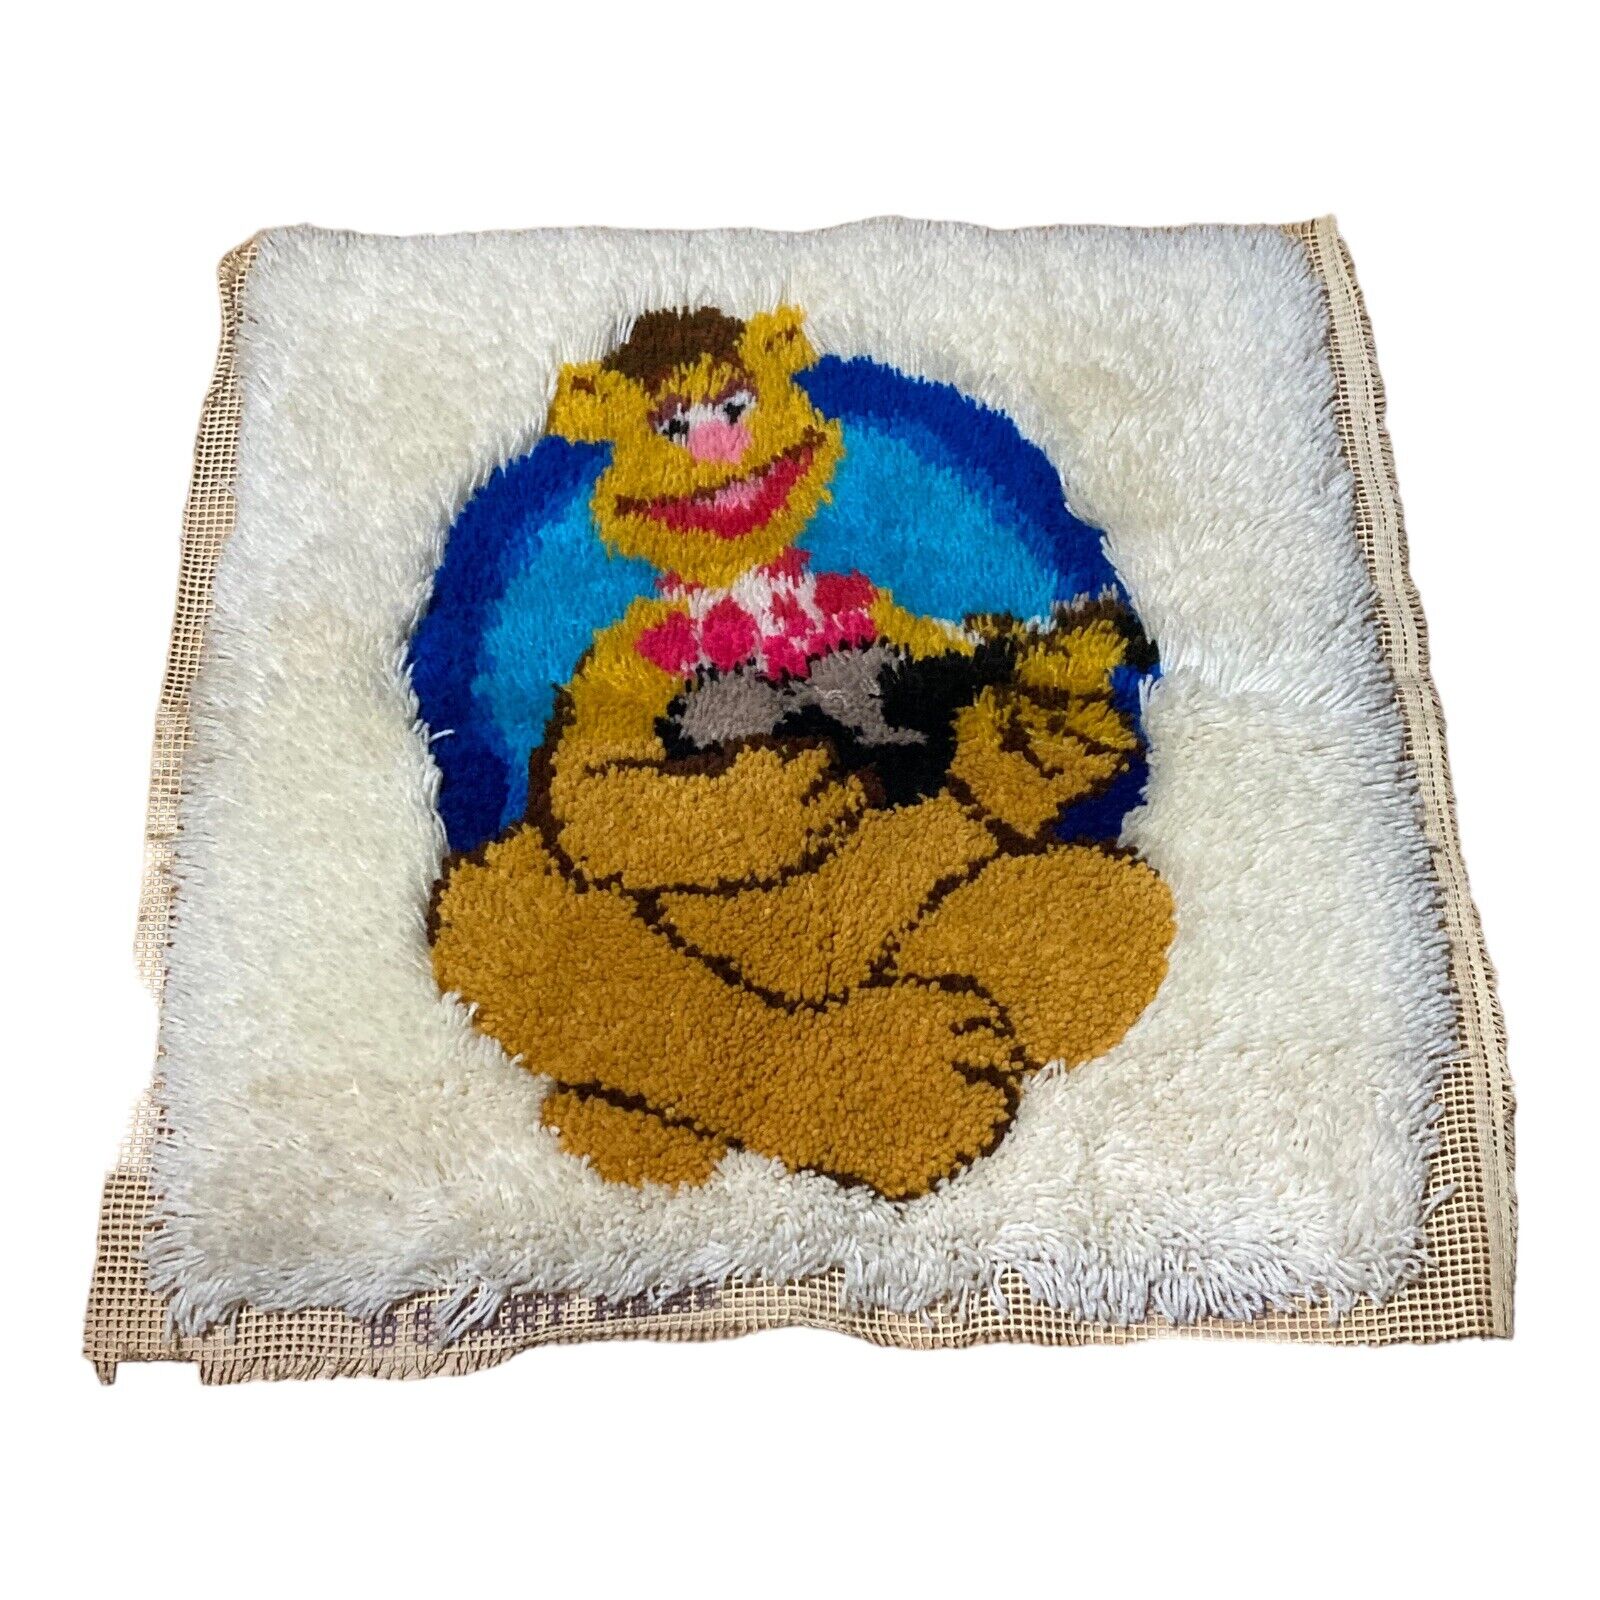 Muppets Fozzy Bear Vintage Caron Latch Hook 1979 26 X 26 Completed